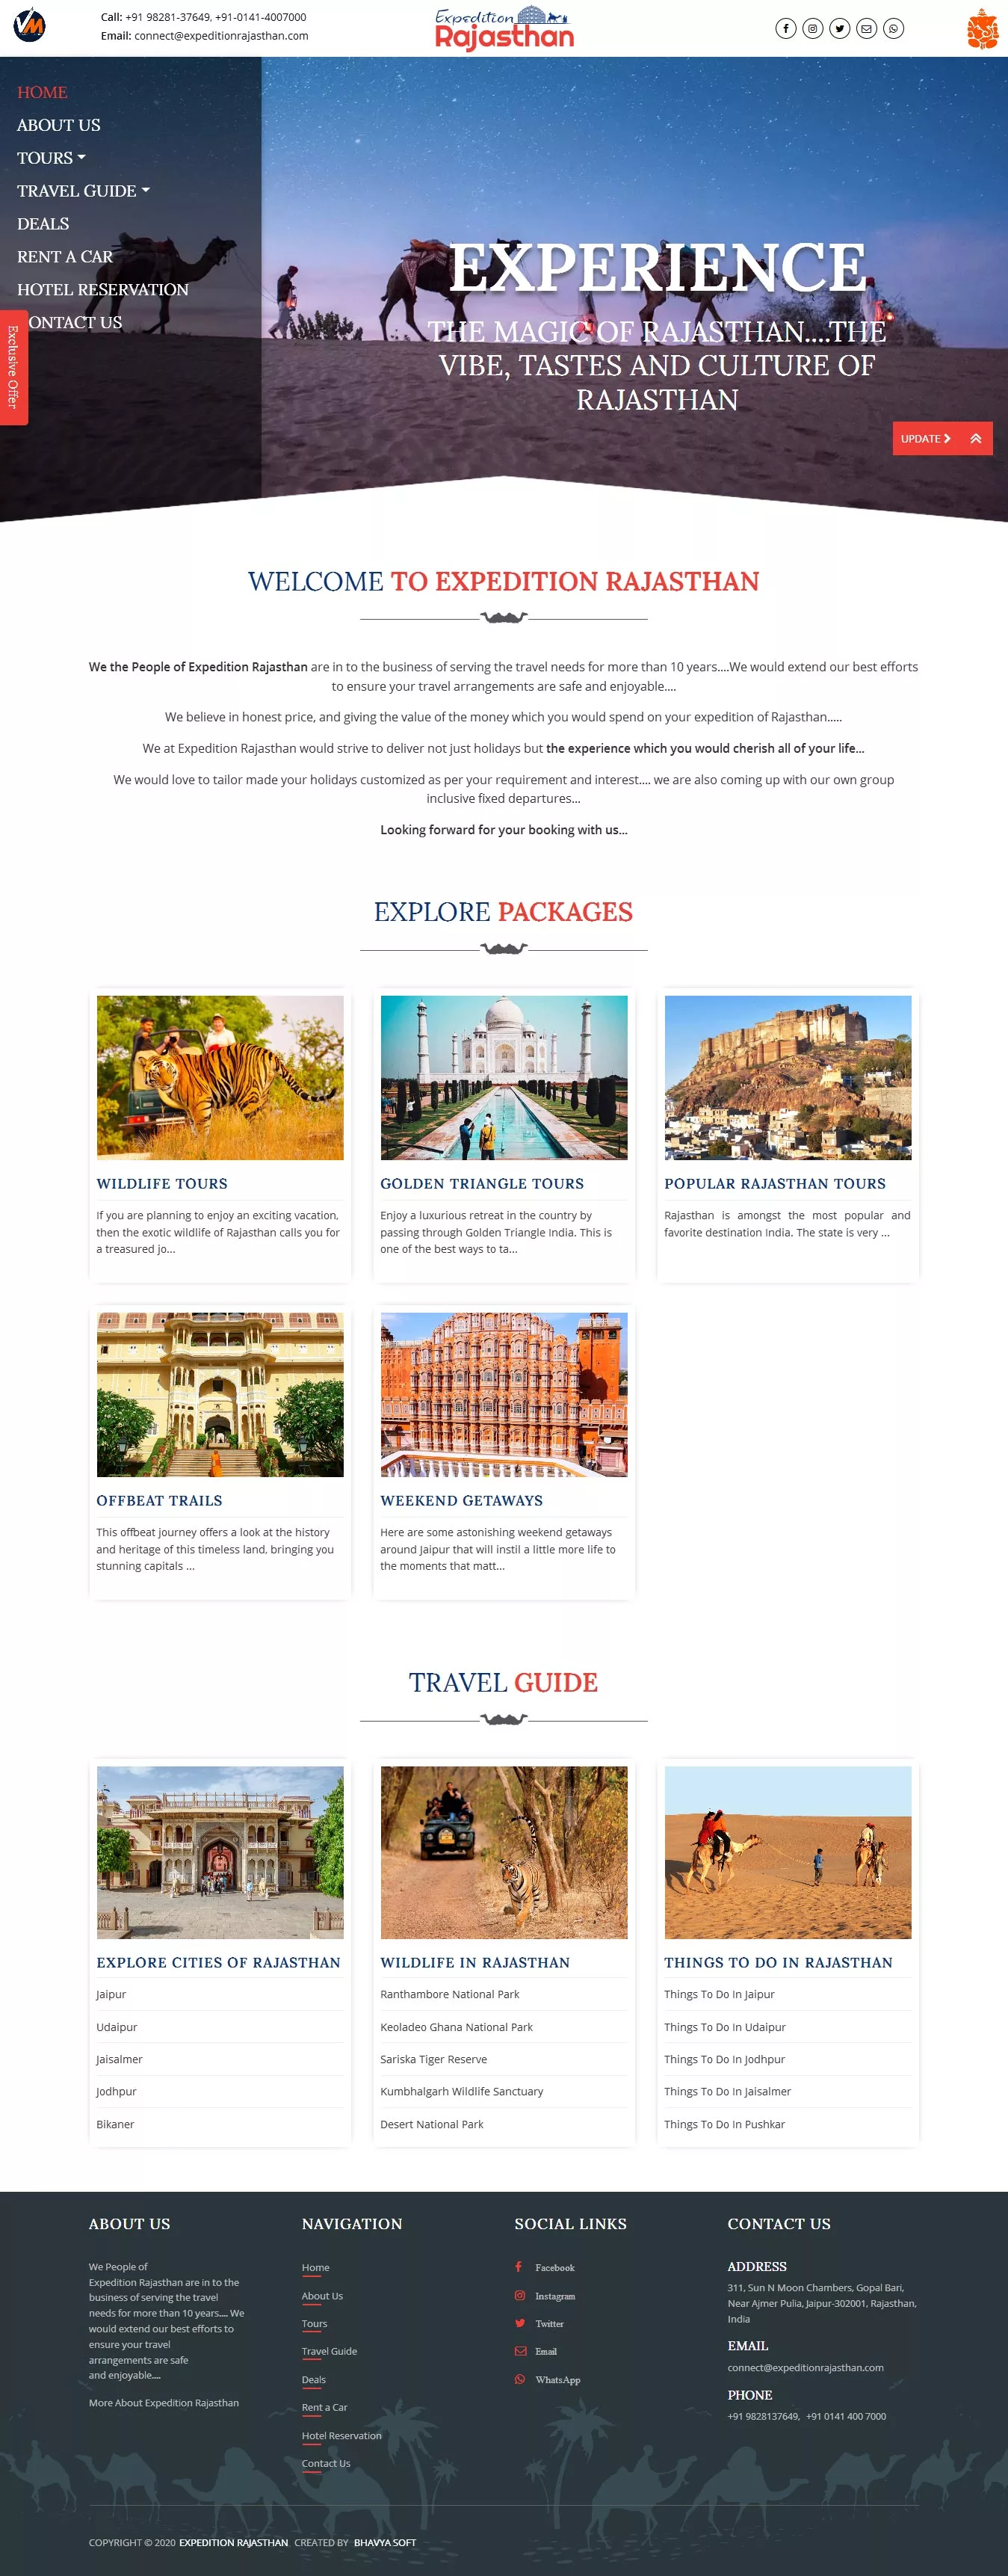 images/expeditionrajasthan-preview.webp